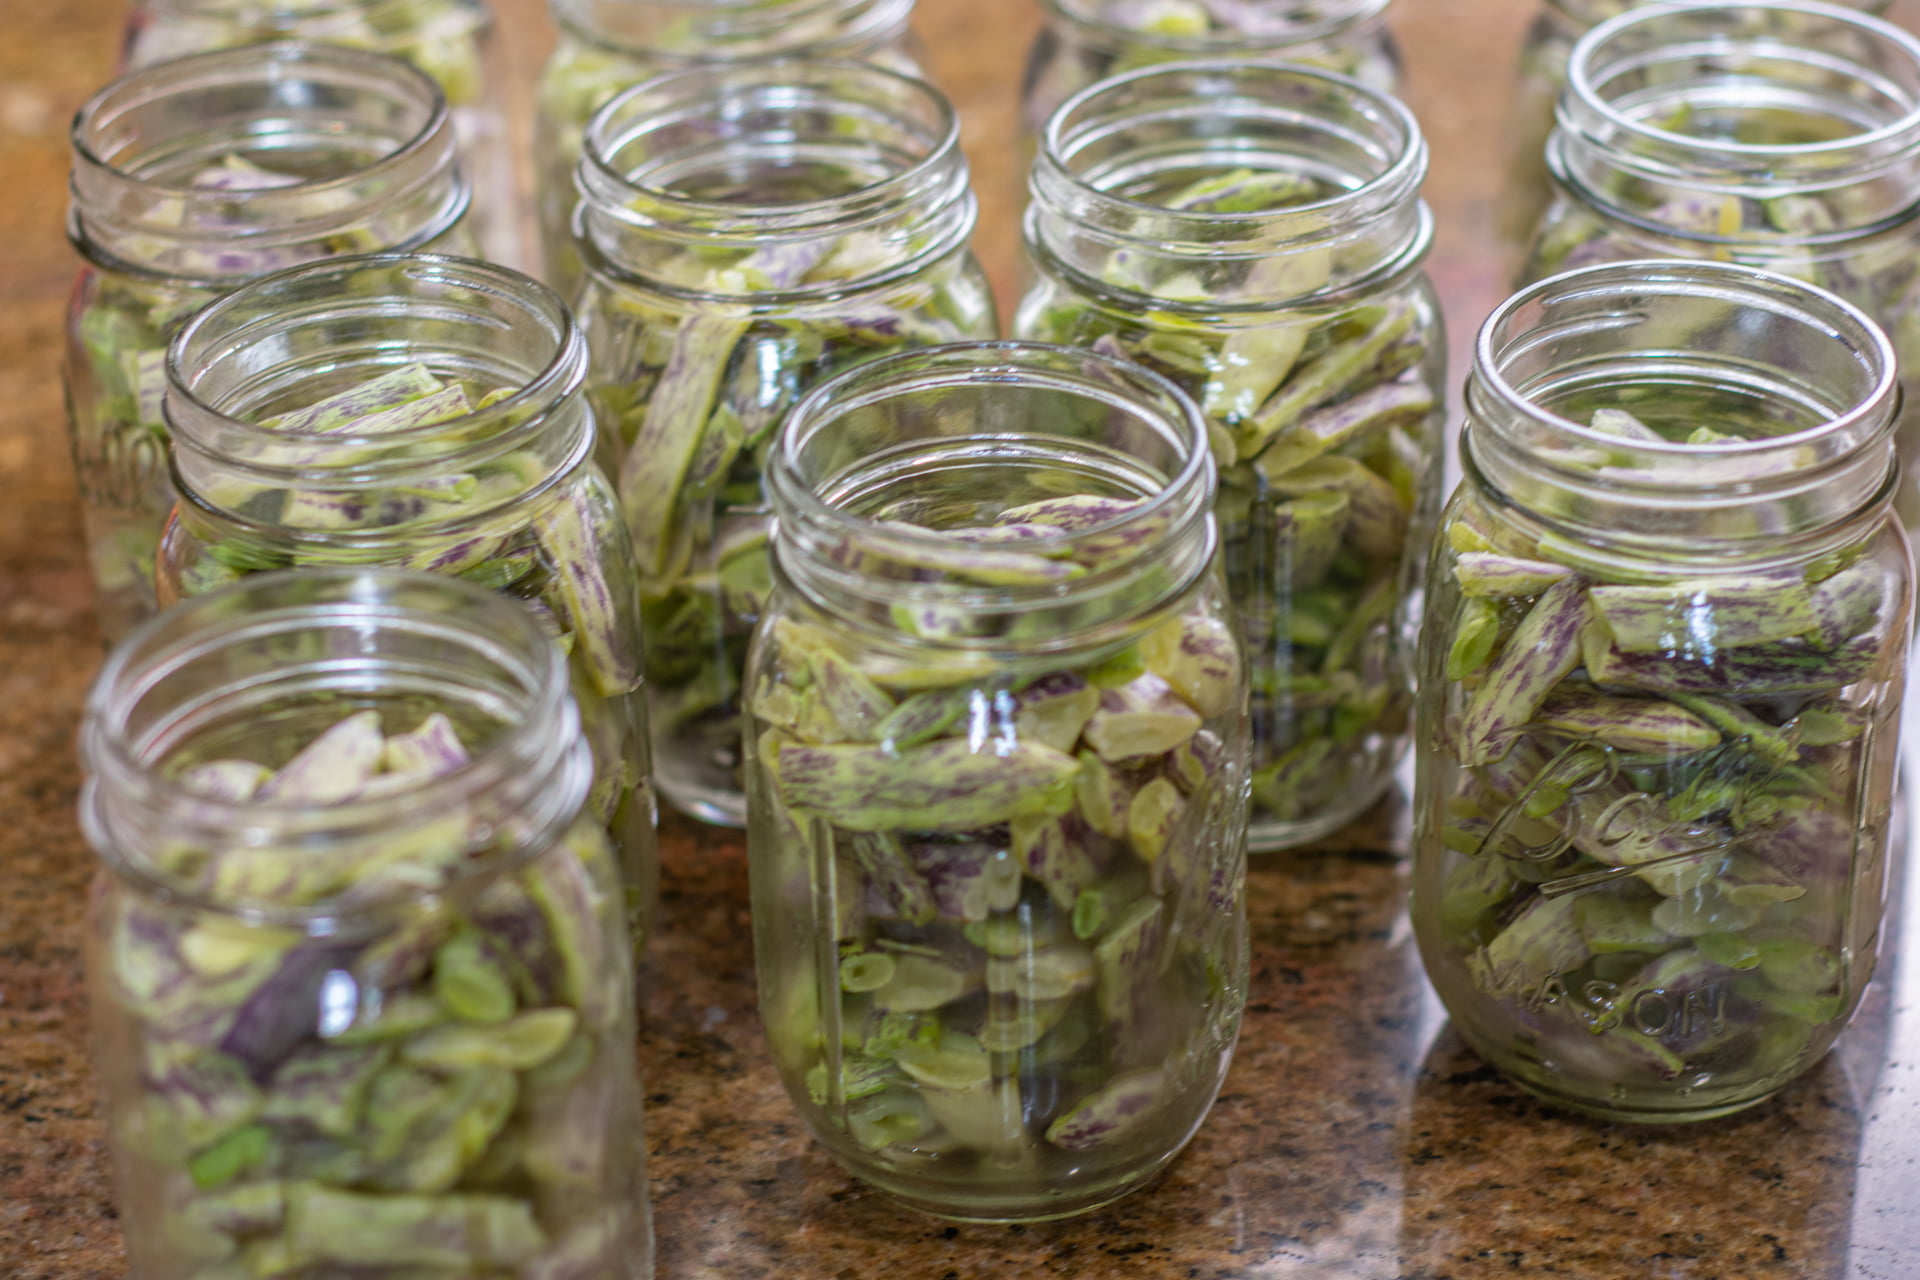 Beans in jars being prepared for canning